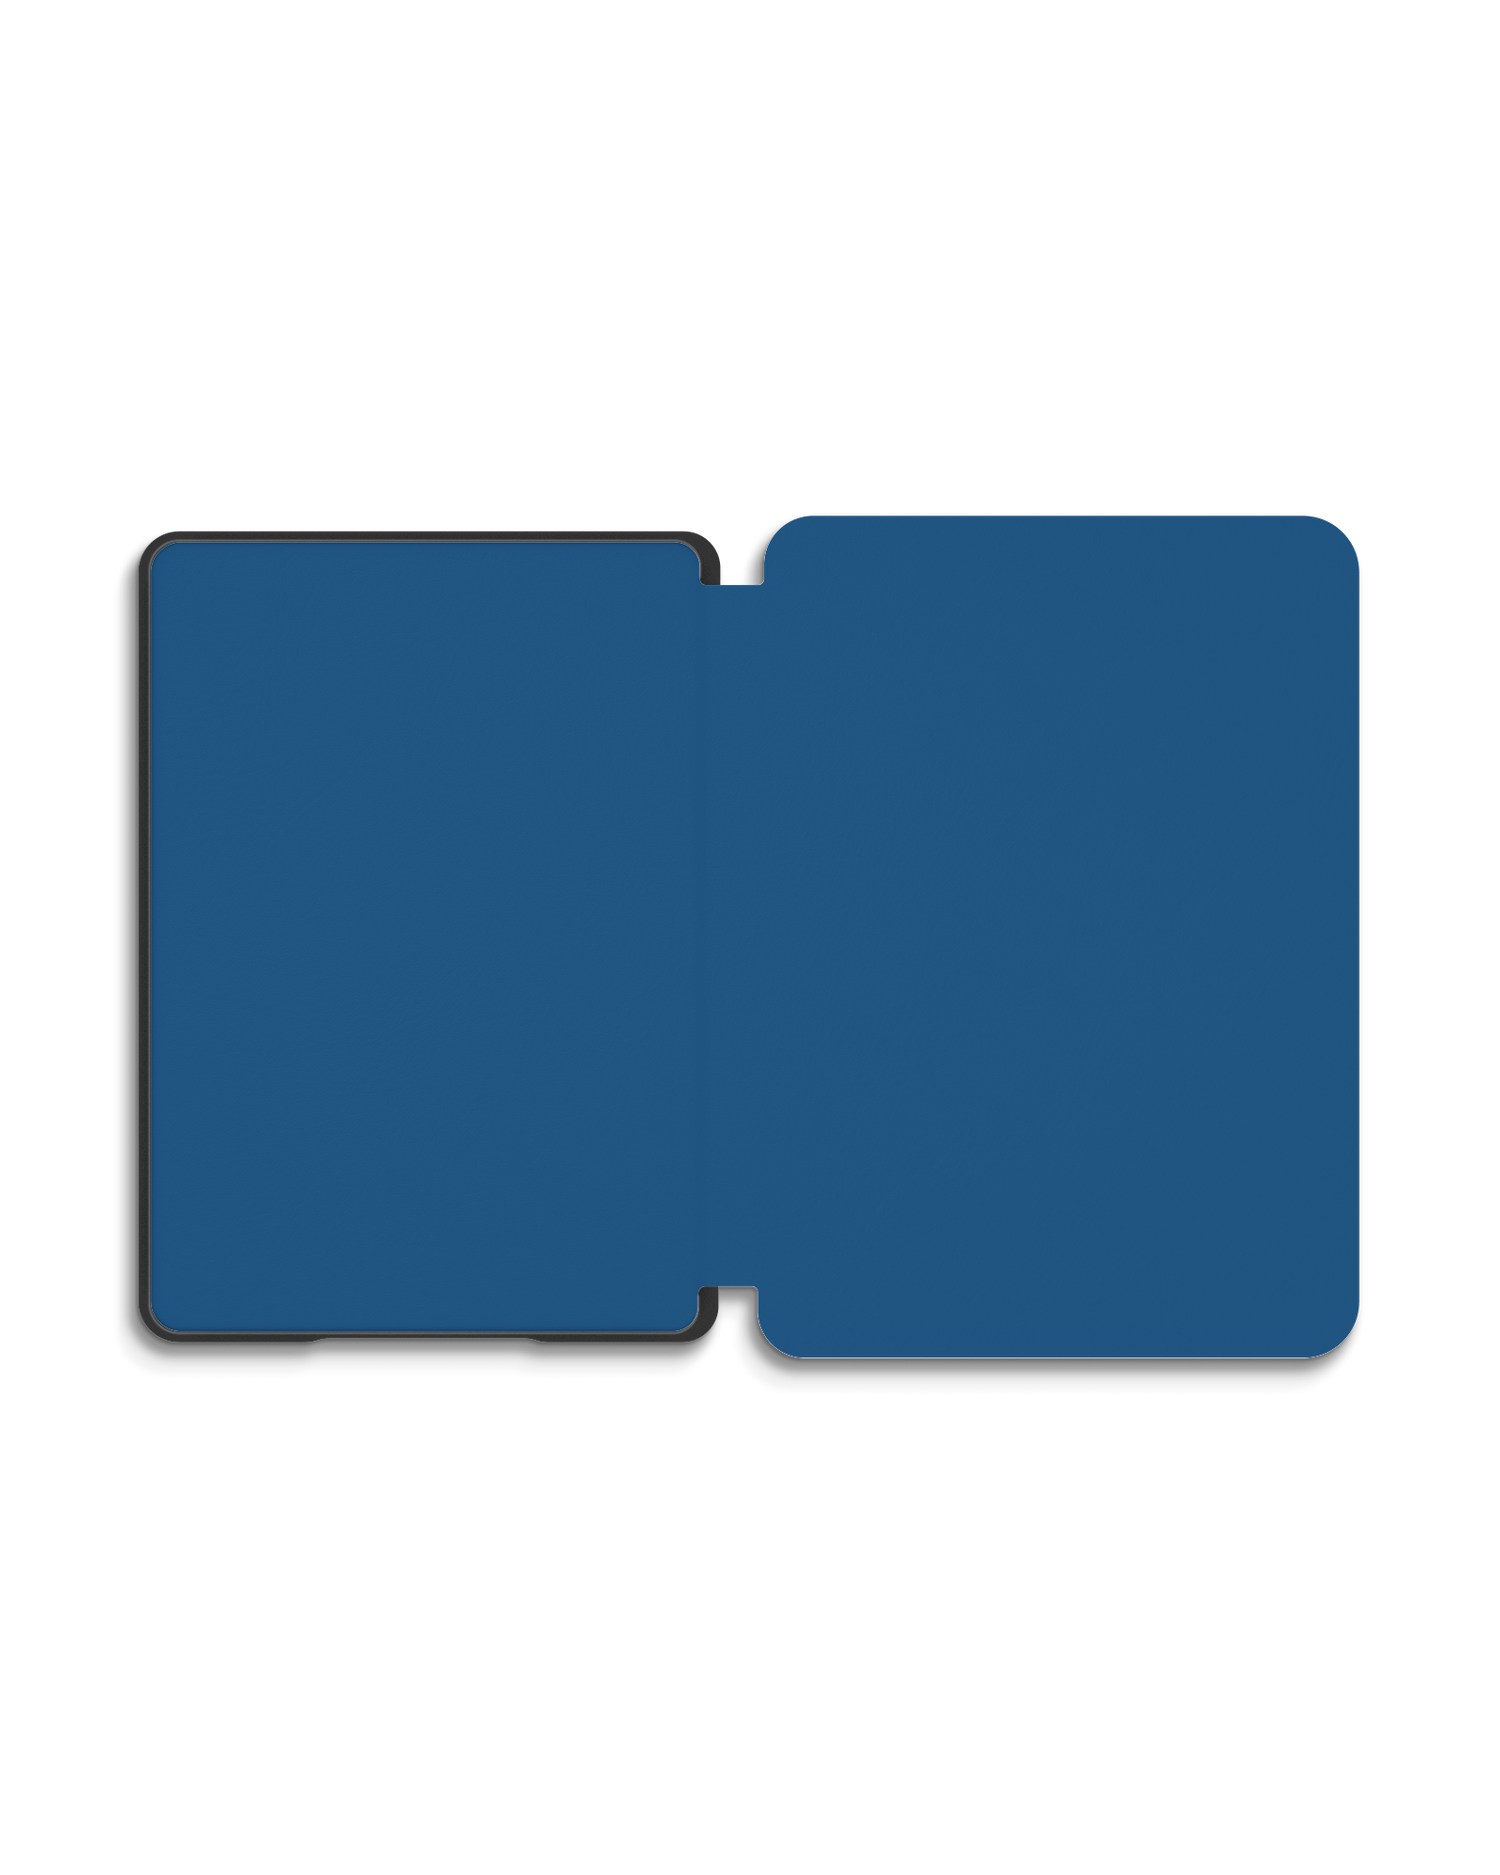 CLASSIC BLUE eReader Smart Case for Amazon New Kindle (2019): Opened exterior view